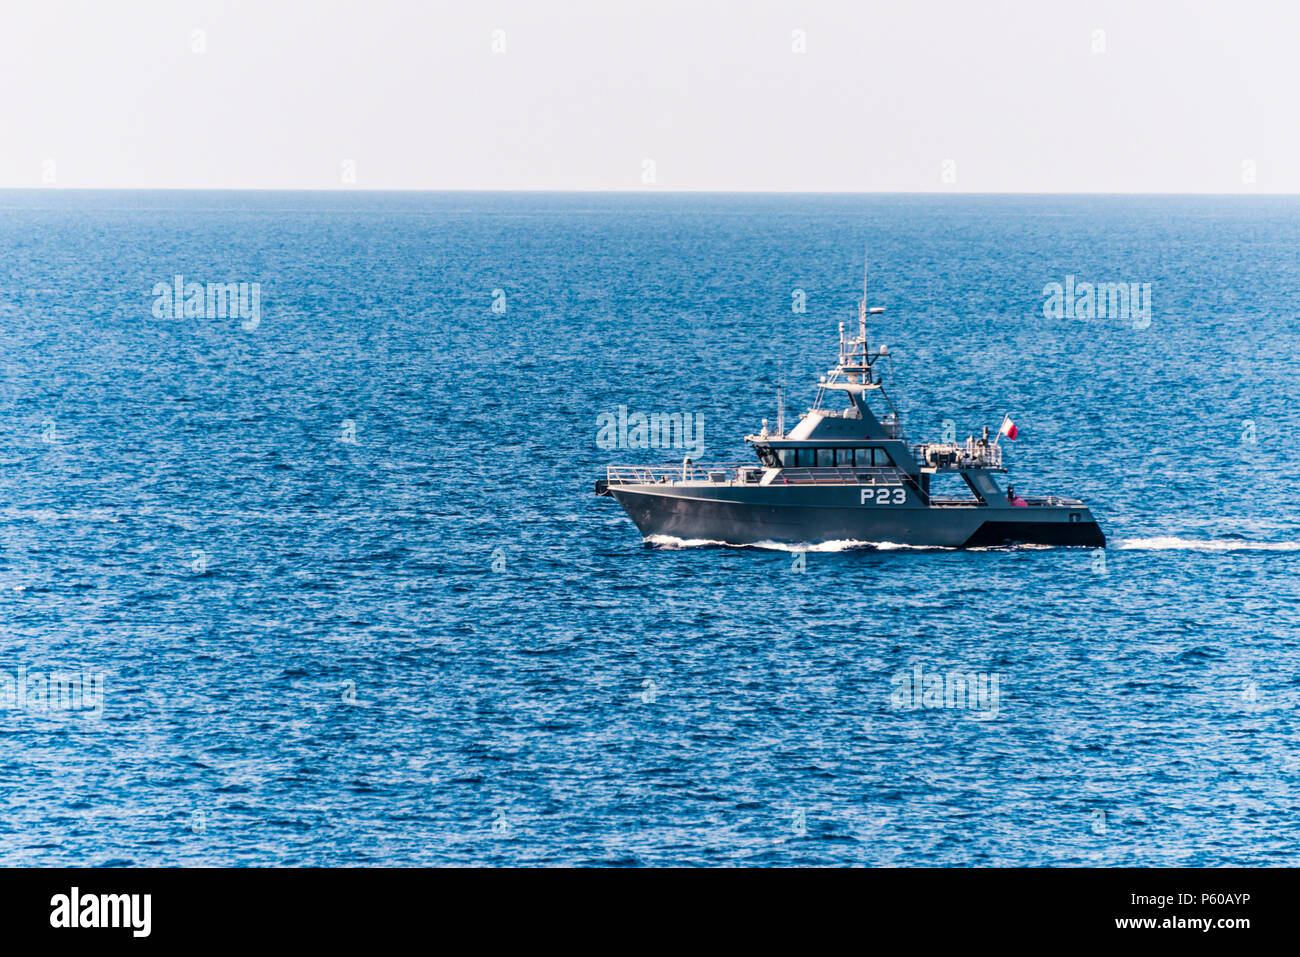 P23, an Austal class offshore patrol boat belonging to the Armed Forces of Malta, patroling the sea around Gozo. Stock Photo